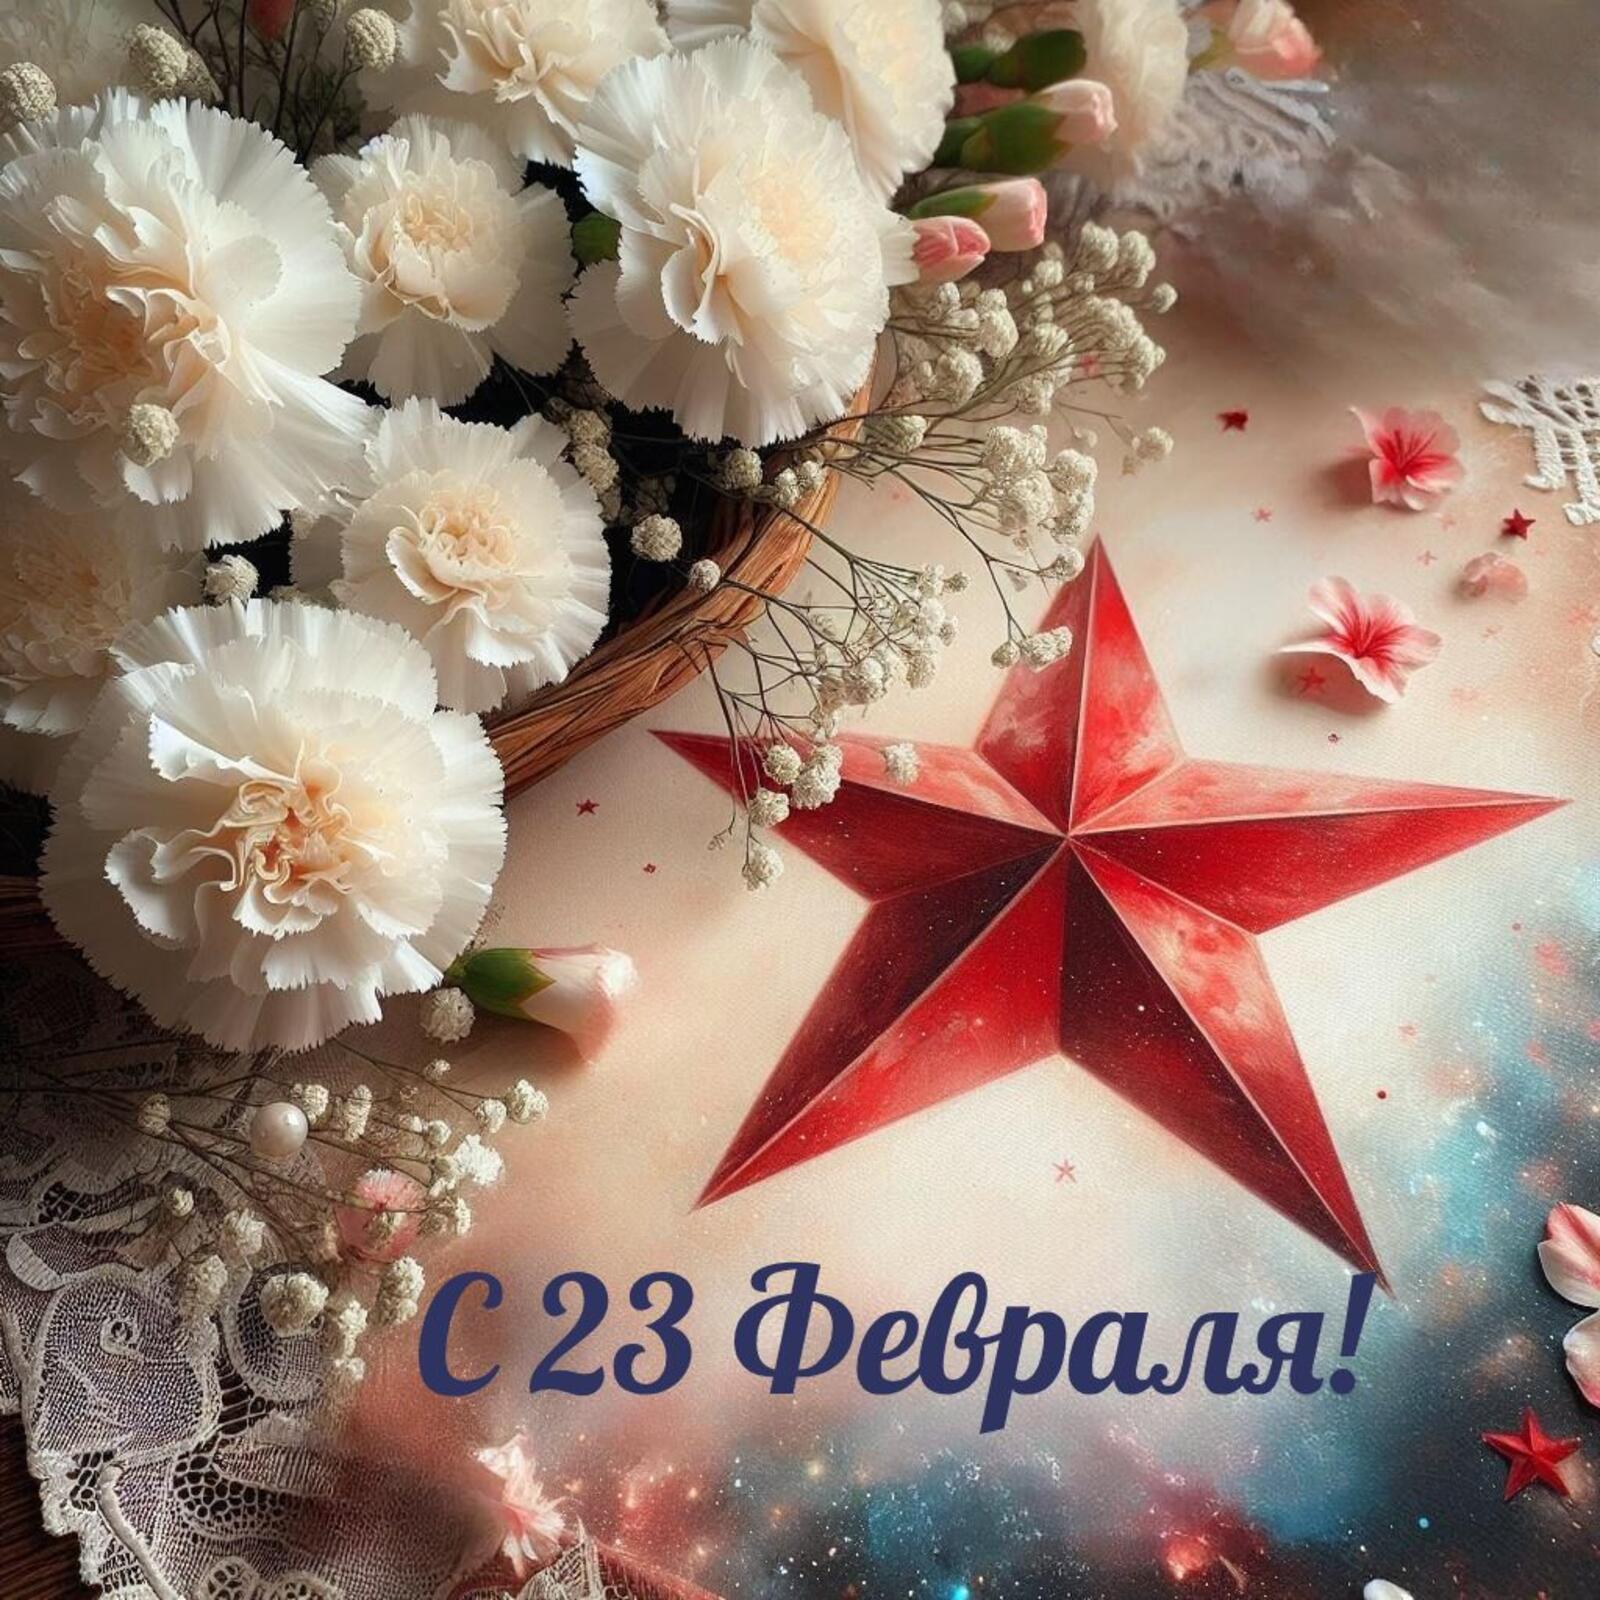 Happy February 23rd and a red star with white flowers